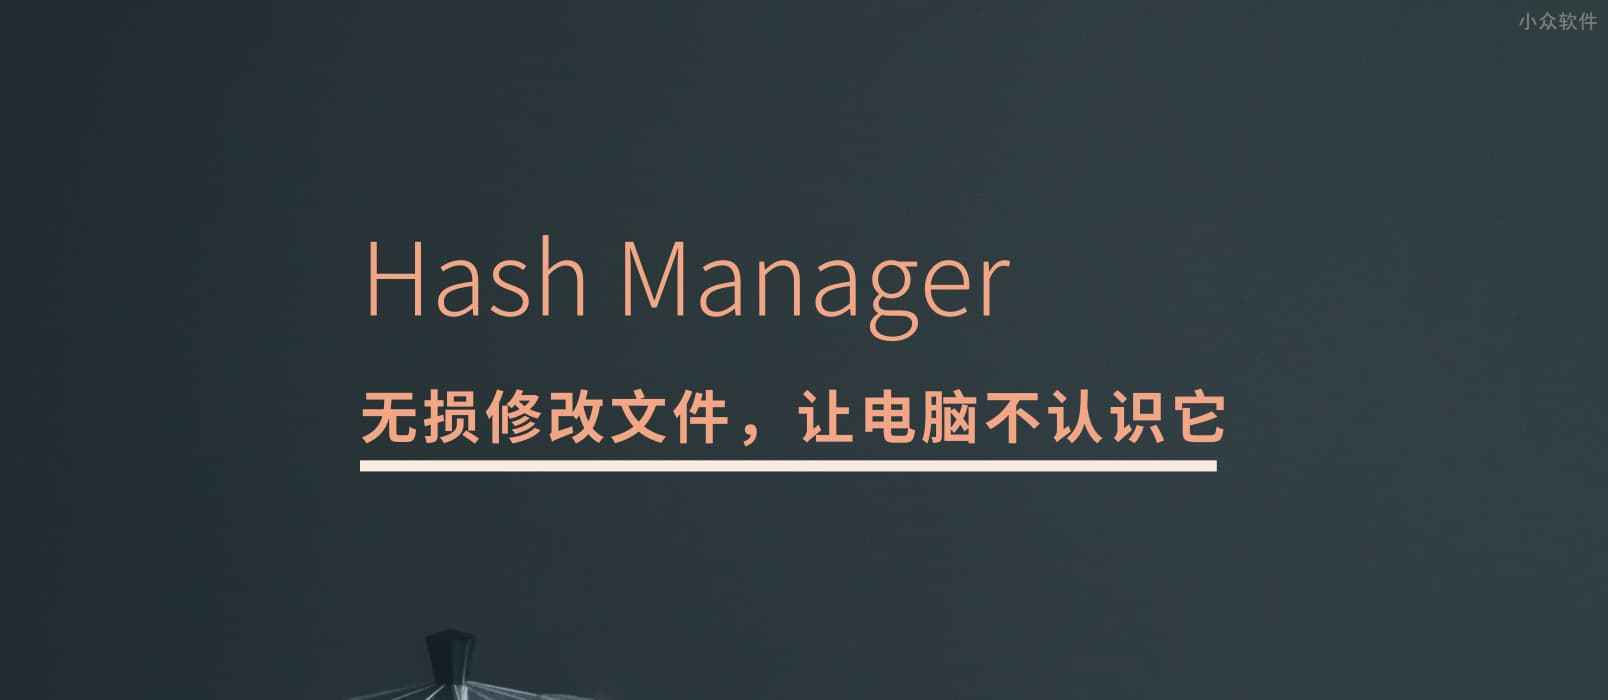 Hash Manager - 批量修改任意文件的哈希值（MD5）[Win] 1